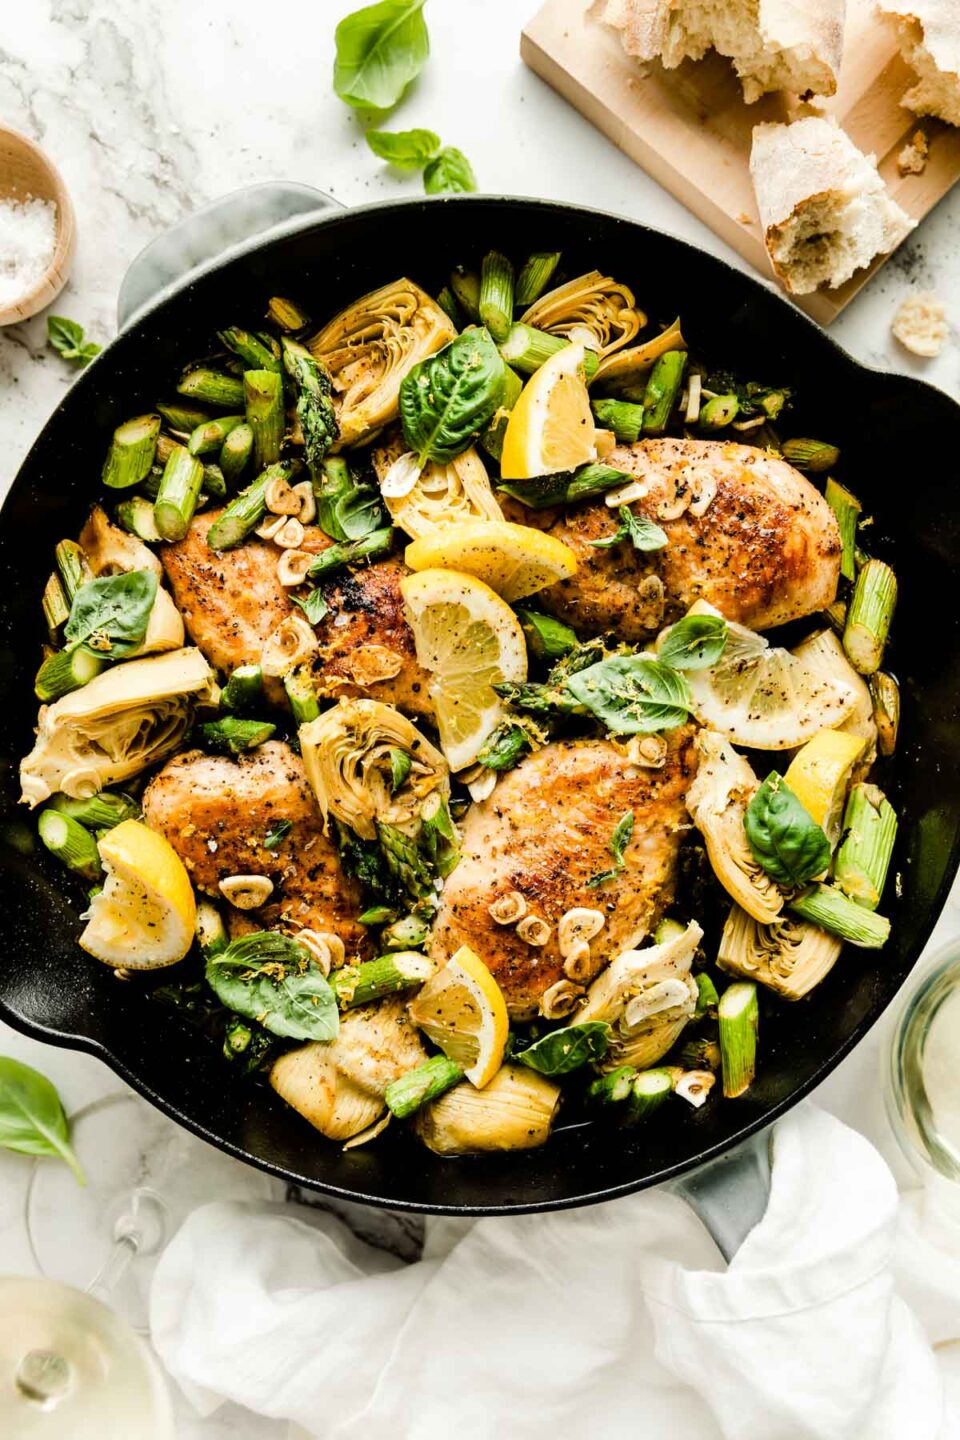 An overhead shot of the baked lemon chicken skillet atop a white marbled surface, with browned chicken breast, chopped asparagus, artichoke hearts and garlic. The skillet is topped with fresh basil leaves and lemon wedges, and surrounded by glasses of white wine and a loaf of crusty bread on a wooden cutting board.